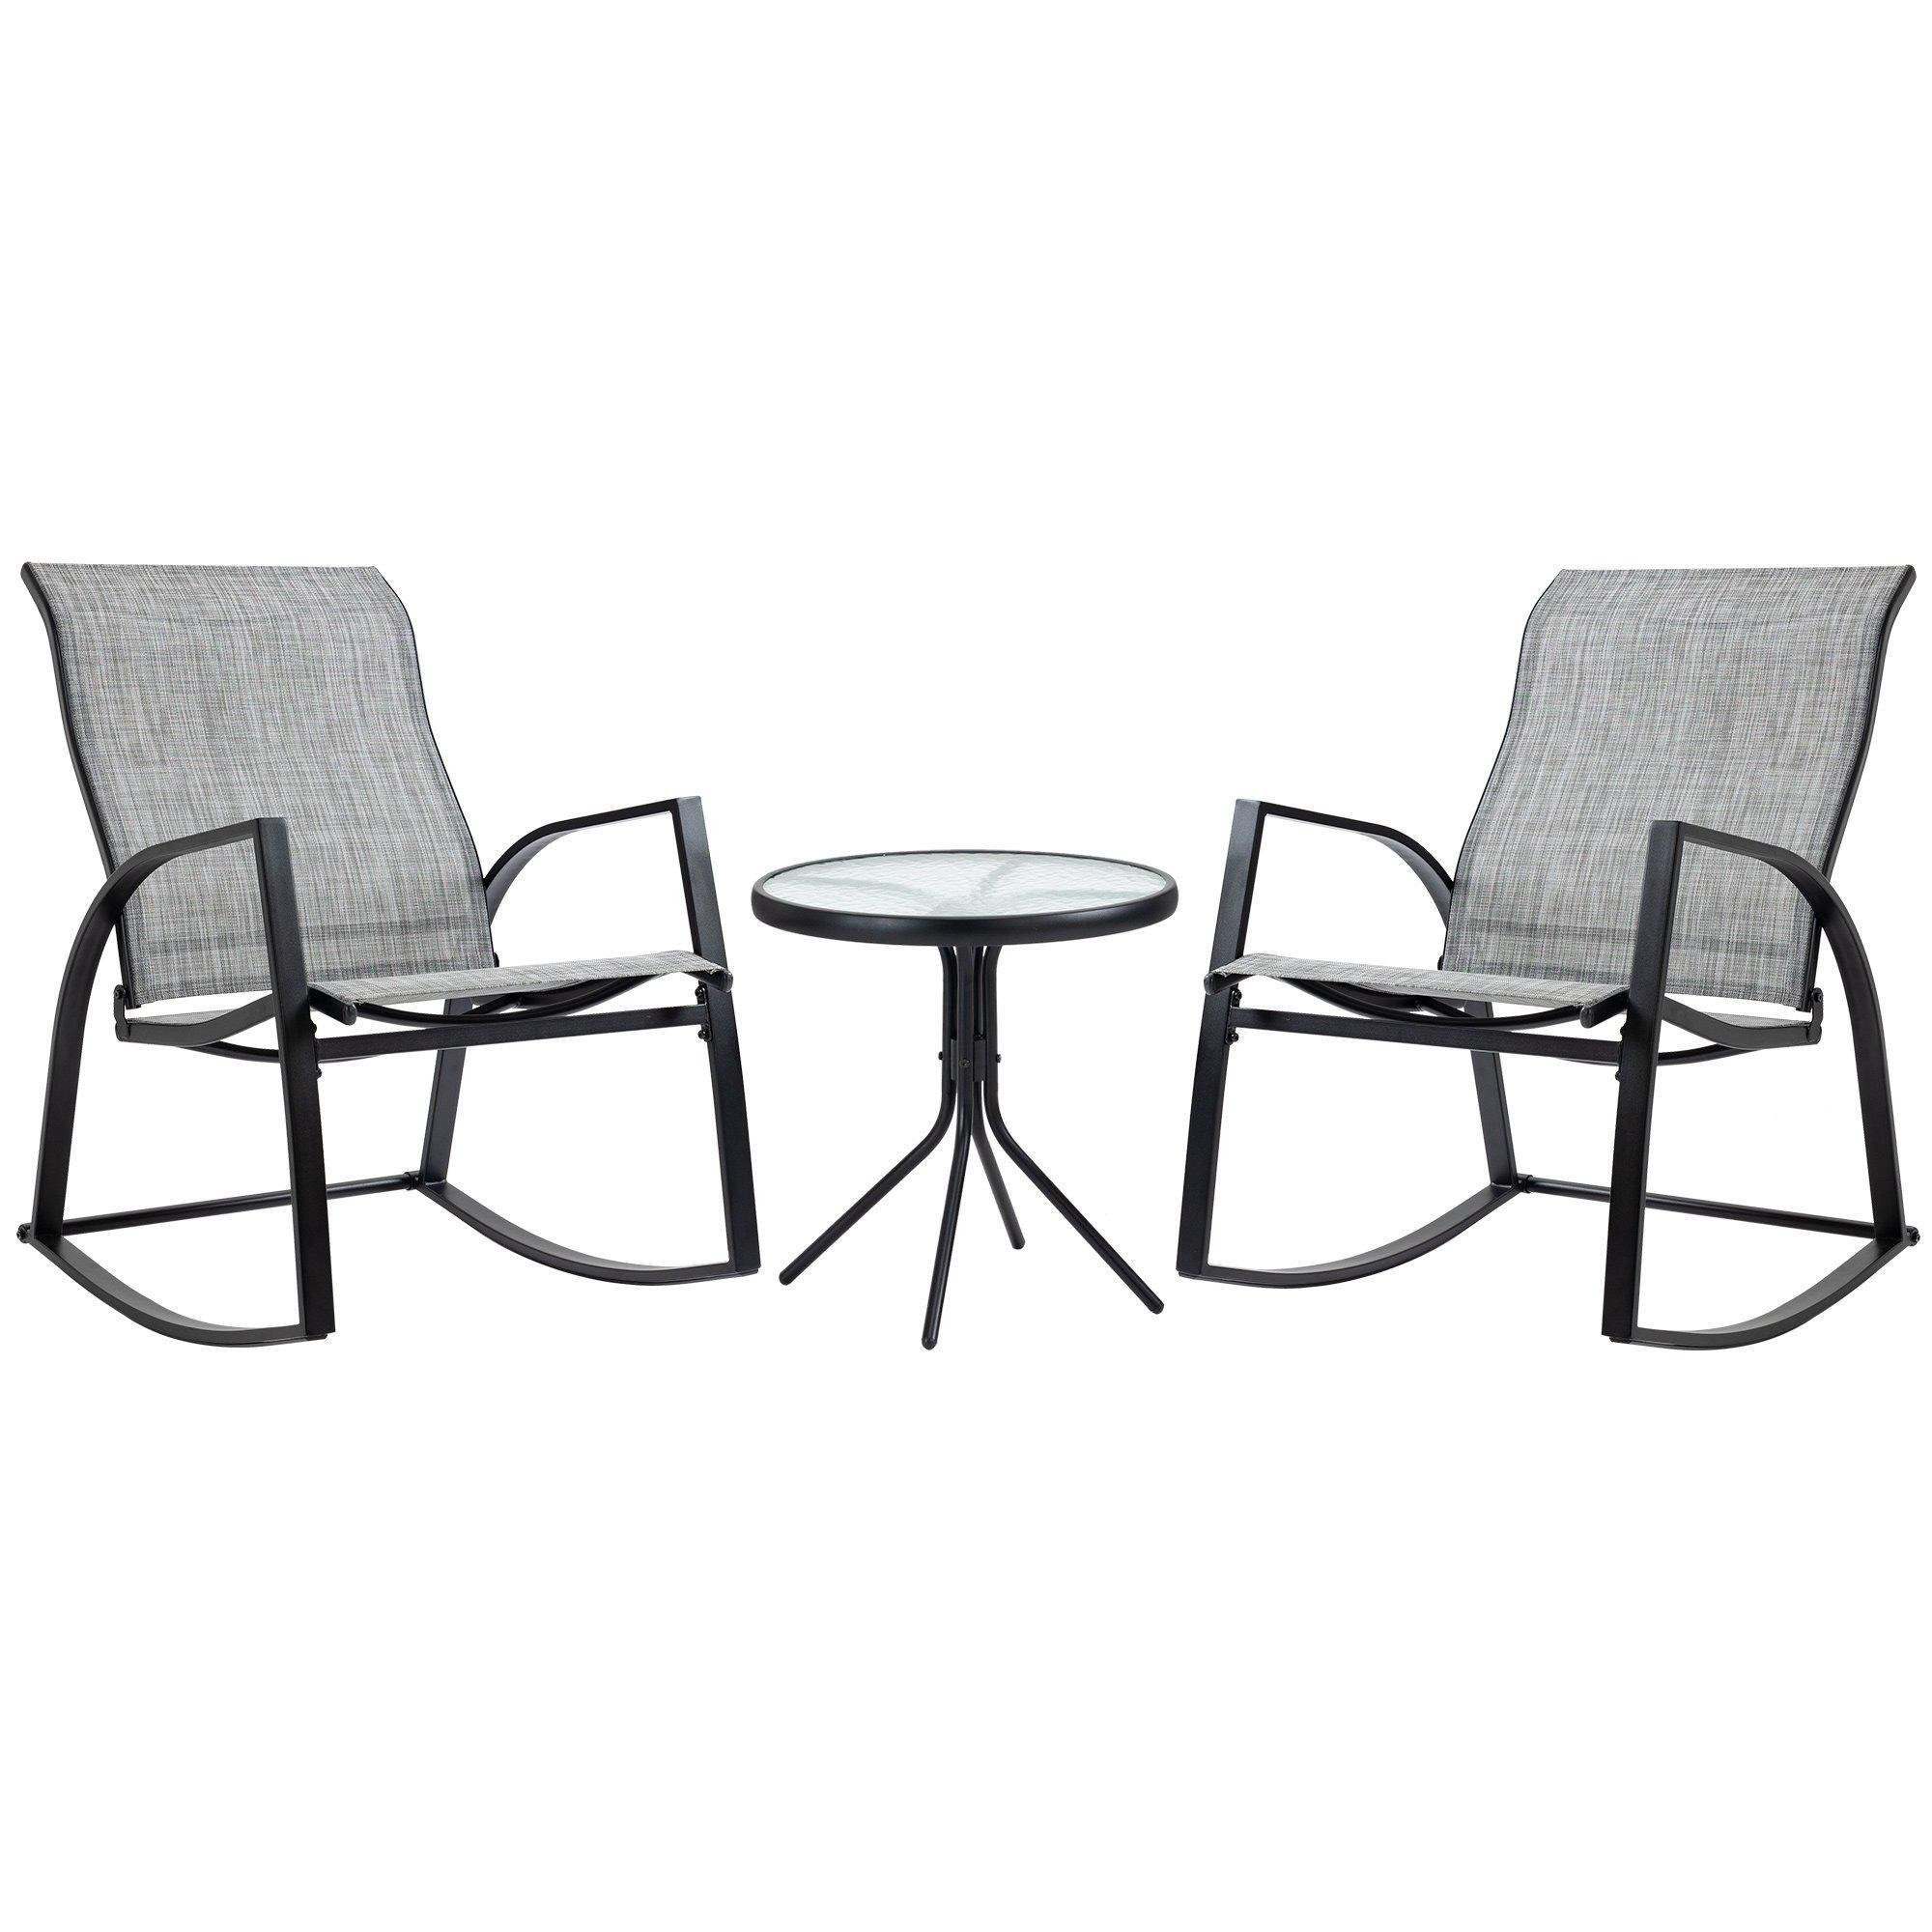 3 Pieces Outdoor Rocking Chairs Set with TempeGlass Table for Garden - image 1